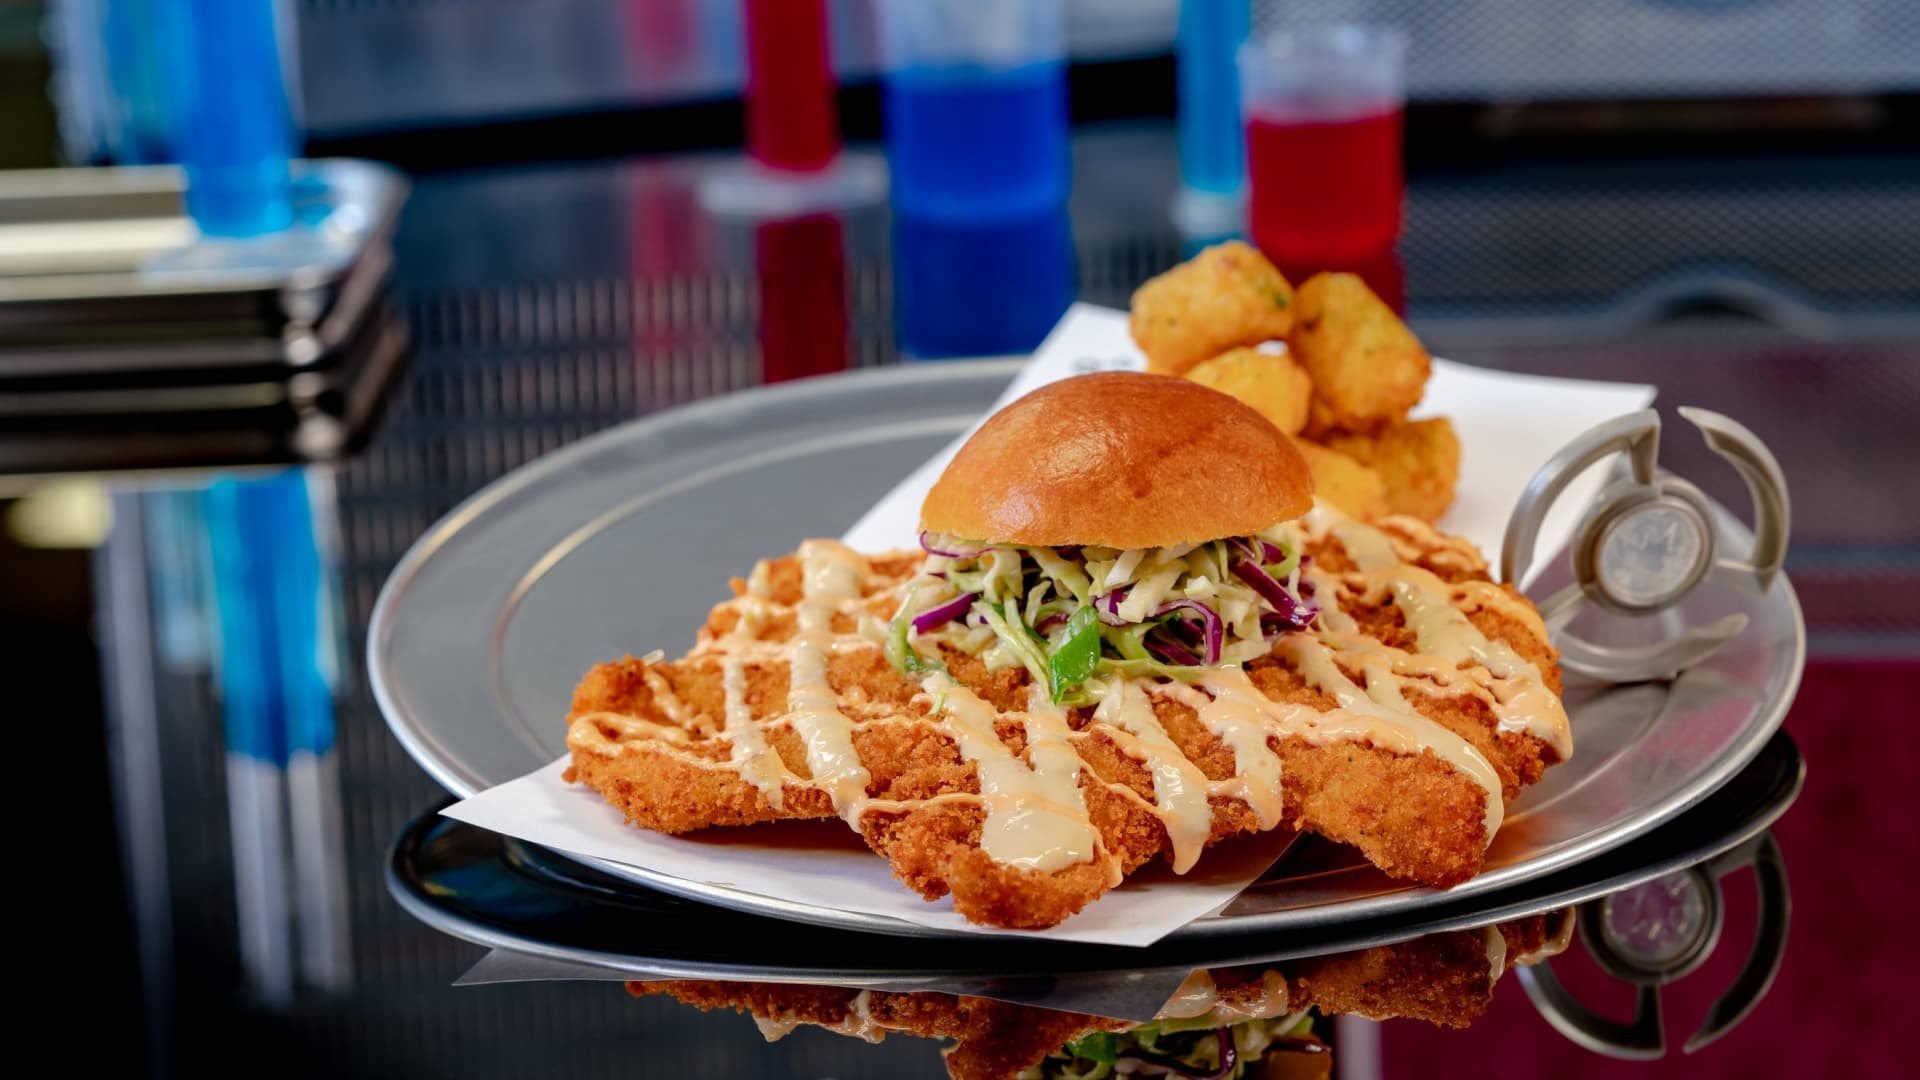 At Pym Test Kitchen in Avengers Campus inside Disney California Adventure Park, Ant-Man and The Wasp use shrinking and growing technology to innovative food. Pictured: The Not So Little Chicken Sandwich.